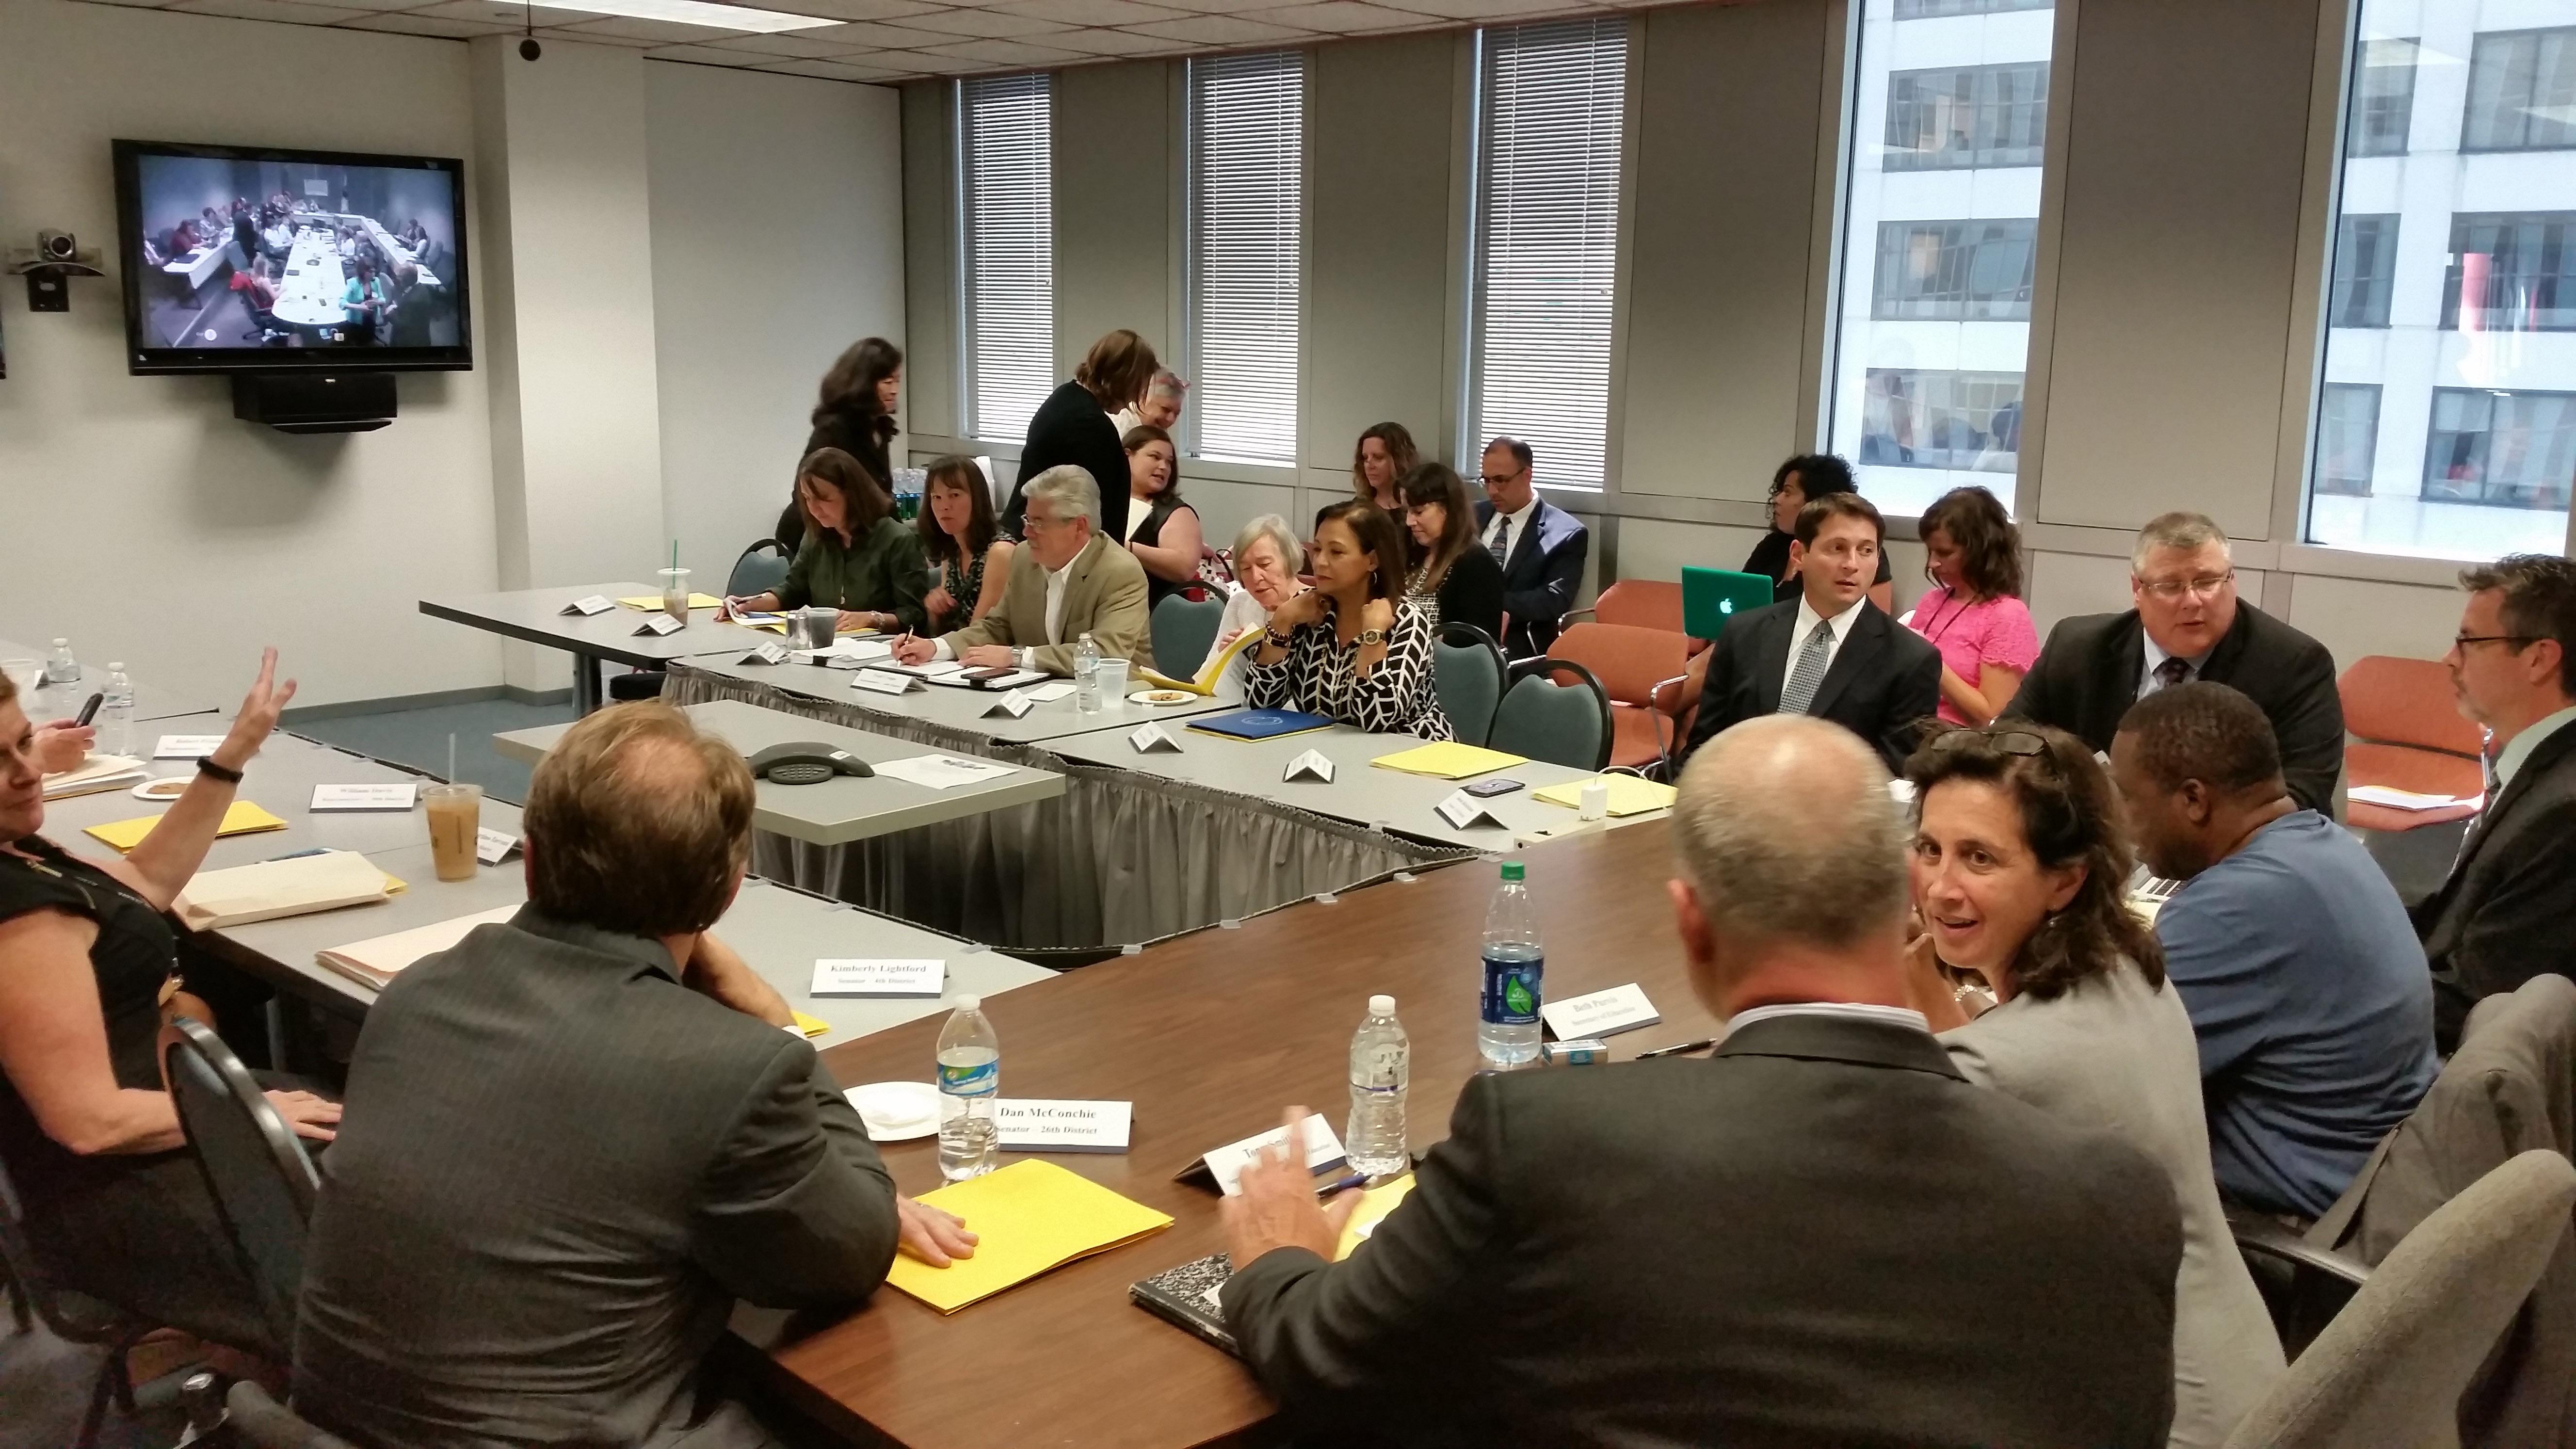 The Illinois School Funding Reform Commission, made up of 25 state legislators and officials, met for the first time Wednesday in downtown Chicago to discussion possible revisions to the state's existing education funding model. (Matt Masterson / Chicago Tonight)